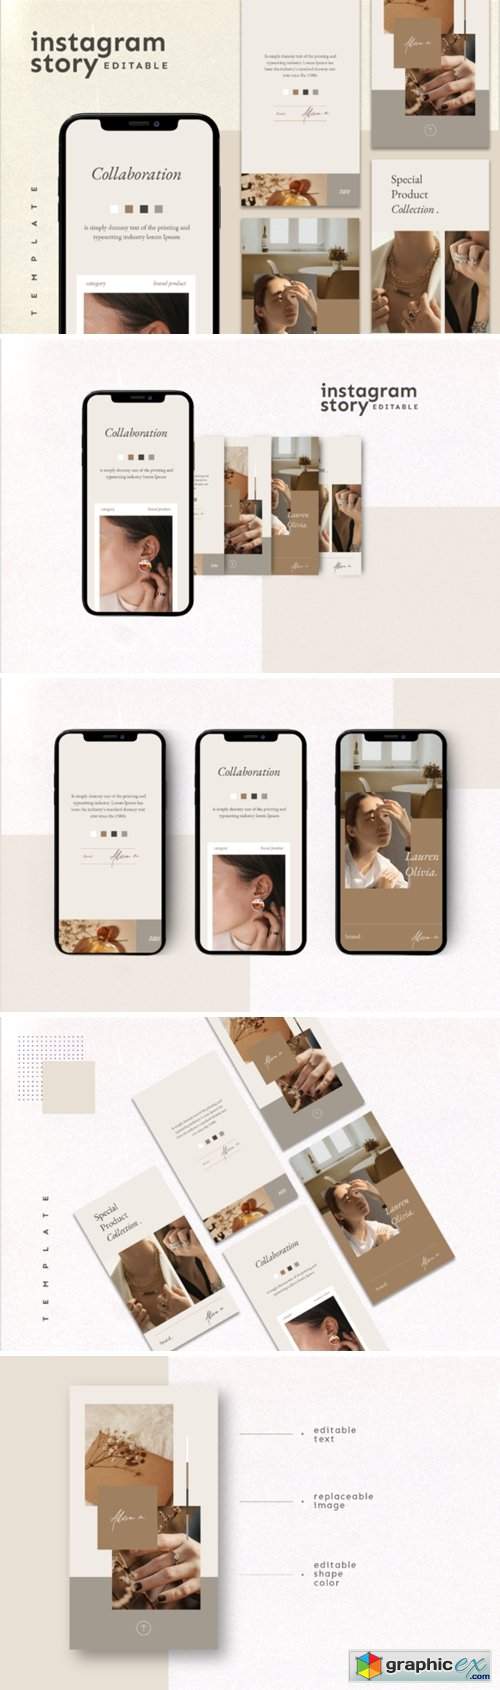  Instagram Story Template 3884612 